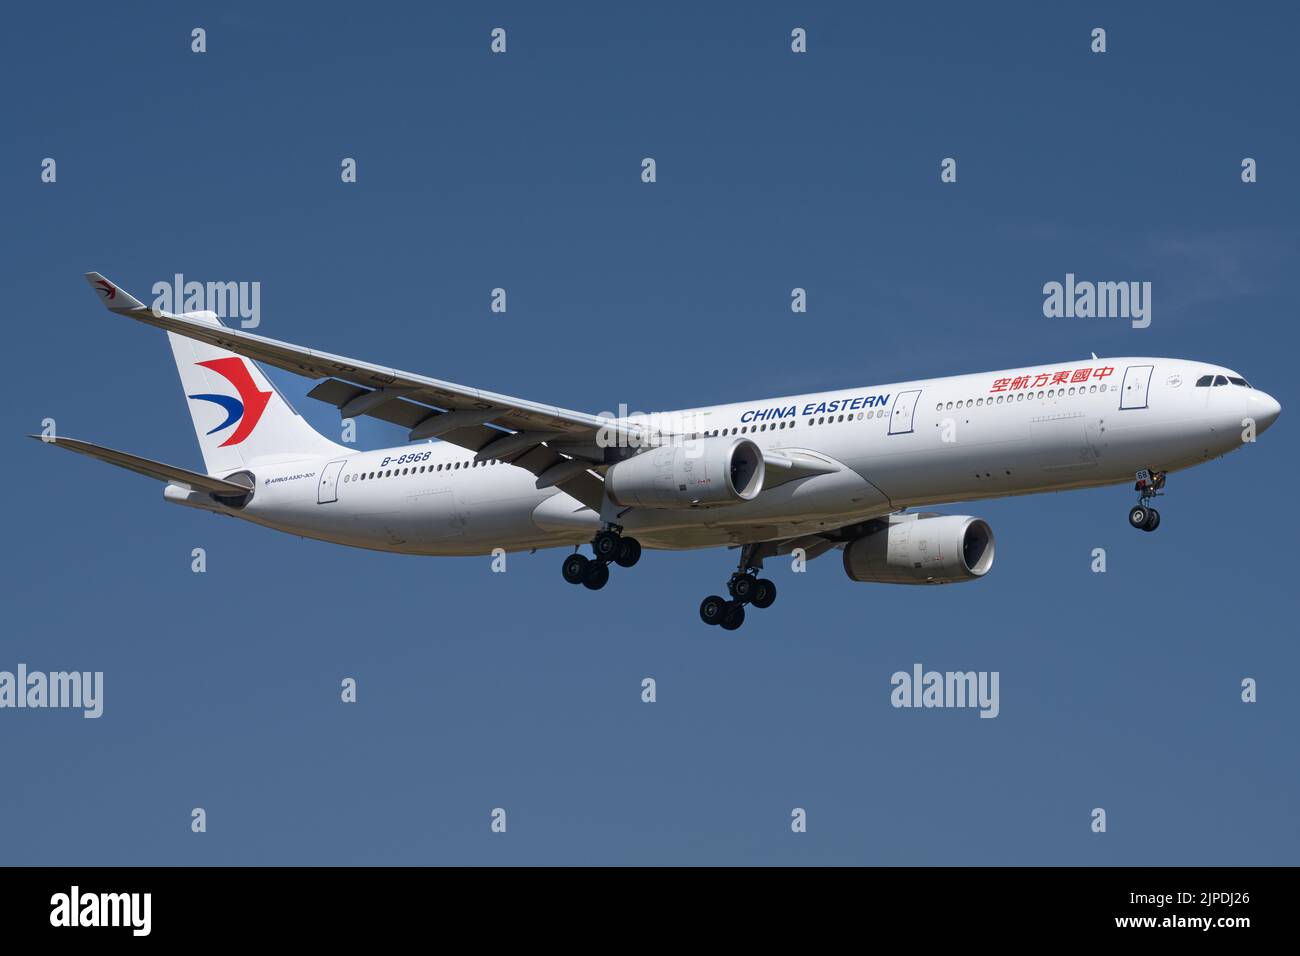 Airbus A330-300 (B-8968) of China Eastern Airlines Lands at London Heathrow Stock Photo